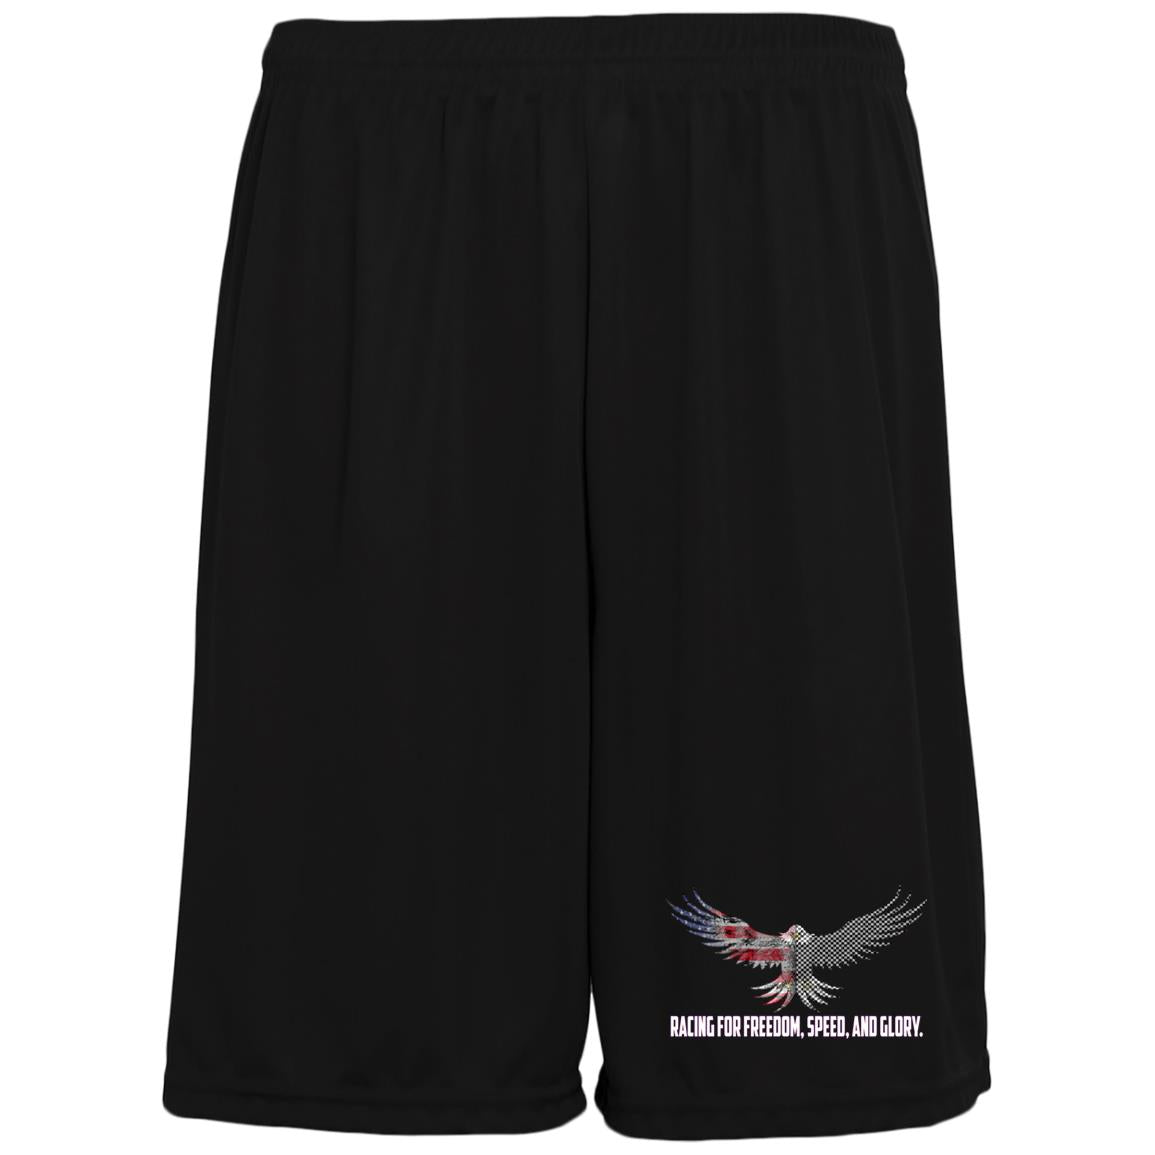 Racing For Freedom, Speed, And Glory Moisture-Wicking Pocketed 9 inch Inseam Training Shorts